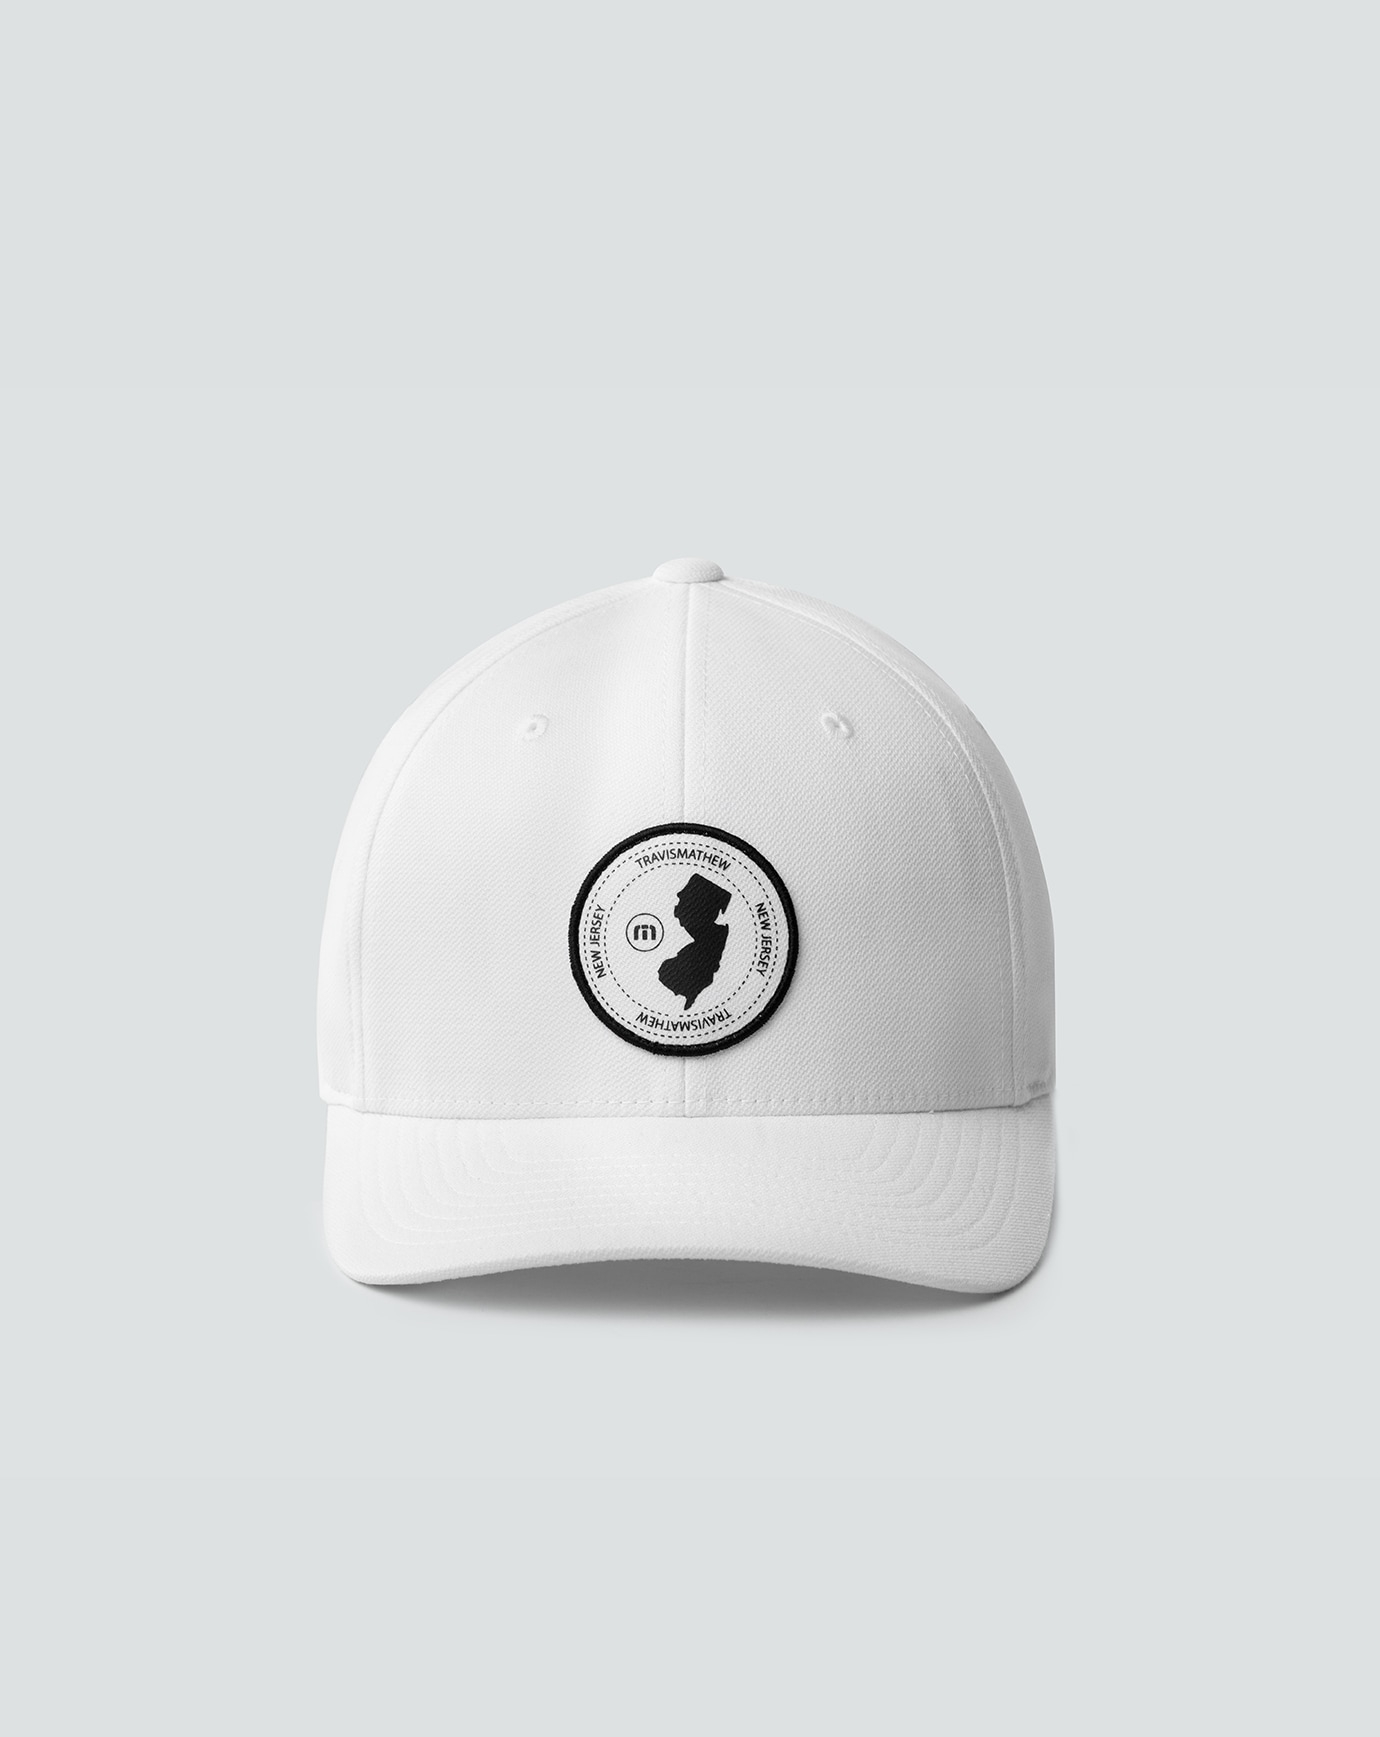 EAST COAST TIME FITTED HAT Image Thumbnail 1